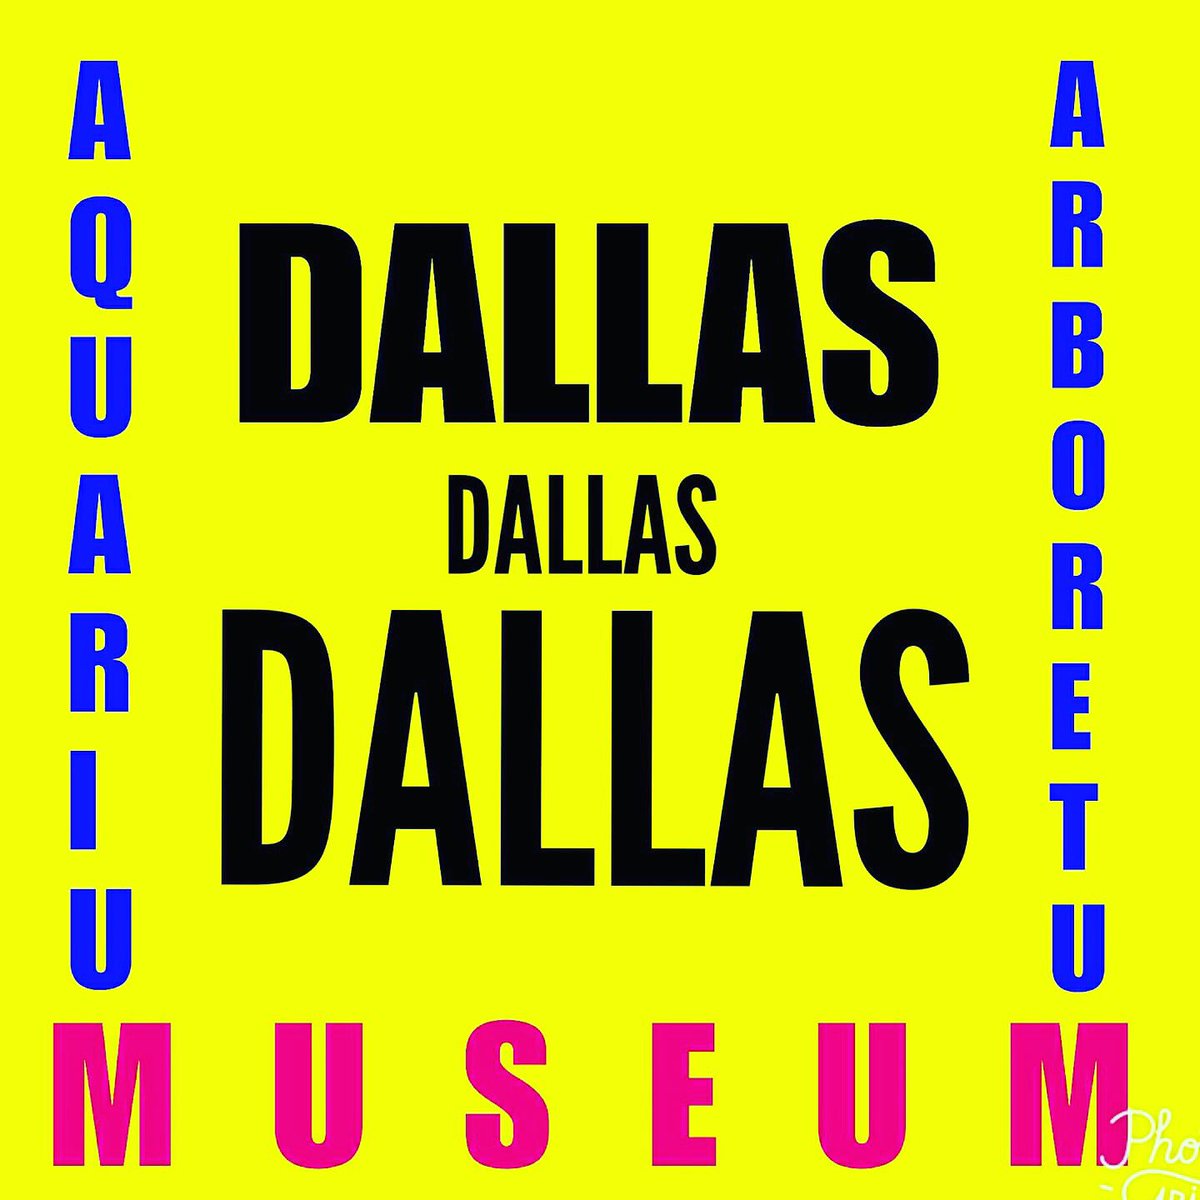 Ready to start the week with some fun? The aquarium, arboretum, and museum are wonderful places to go bebop around!

#dfwkidsdirectory #freemycity #freemycitydfw #dallasarboretum #dallasworldaquarium #dallasmuseumofart #dfw #localblogger #localmom